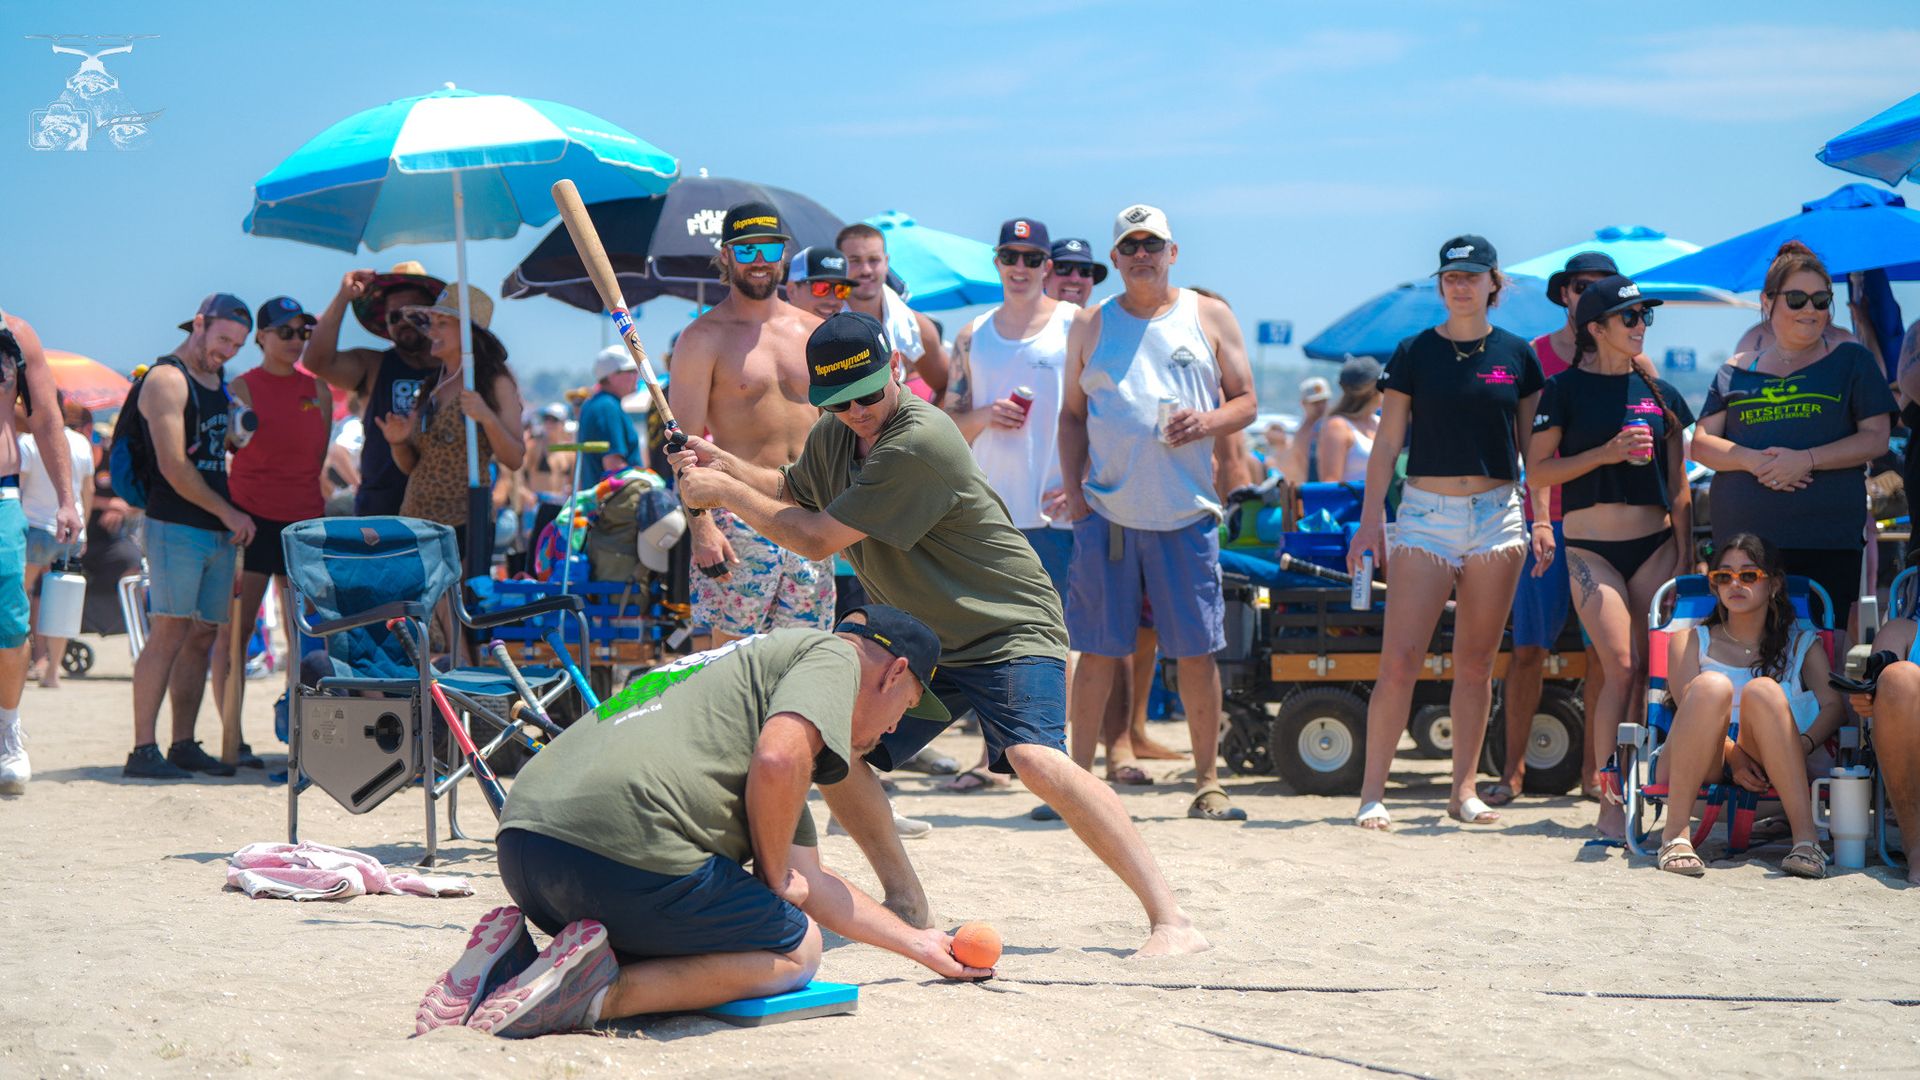 A crowd of people in beach wear watch two men in green tee shirts playing a wiffle-ball like game on the beach. 